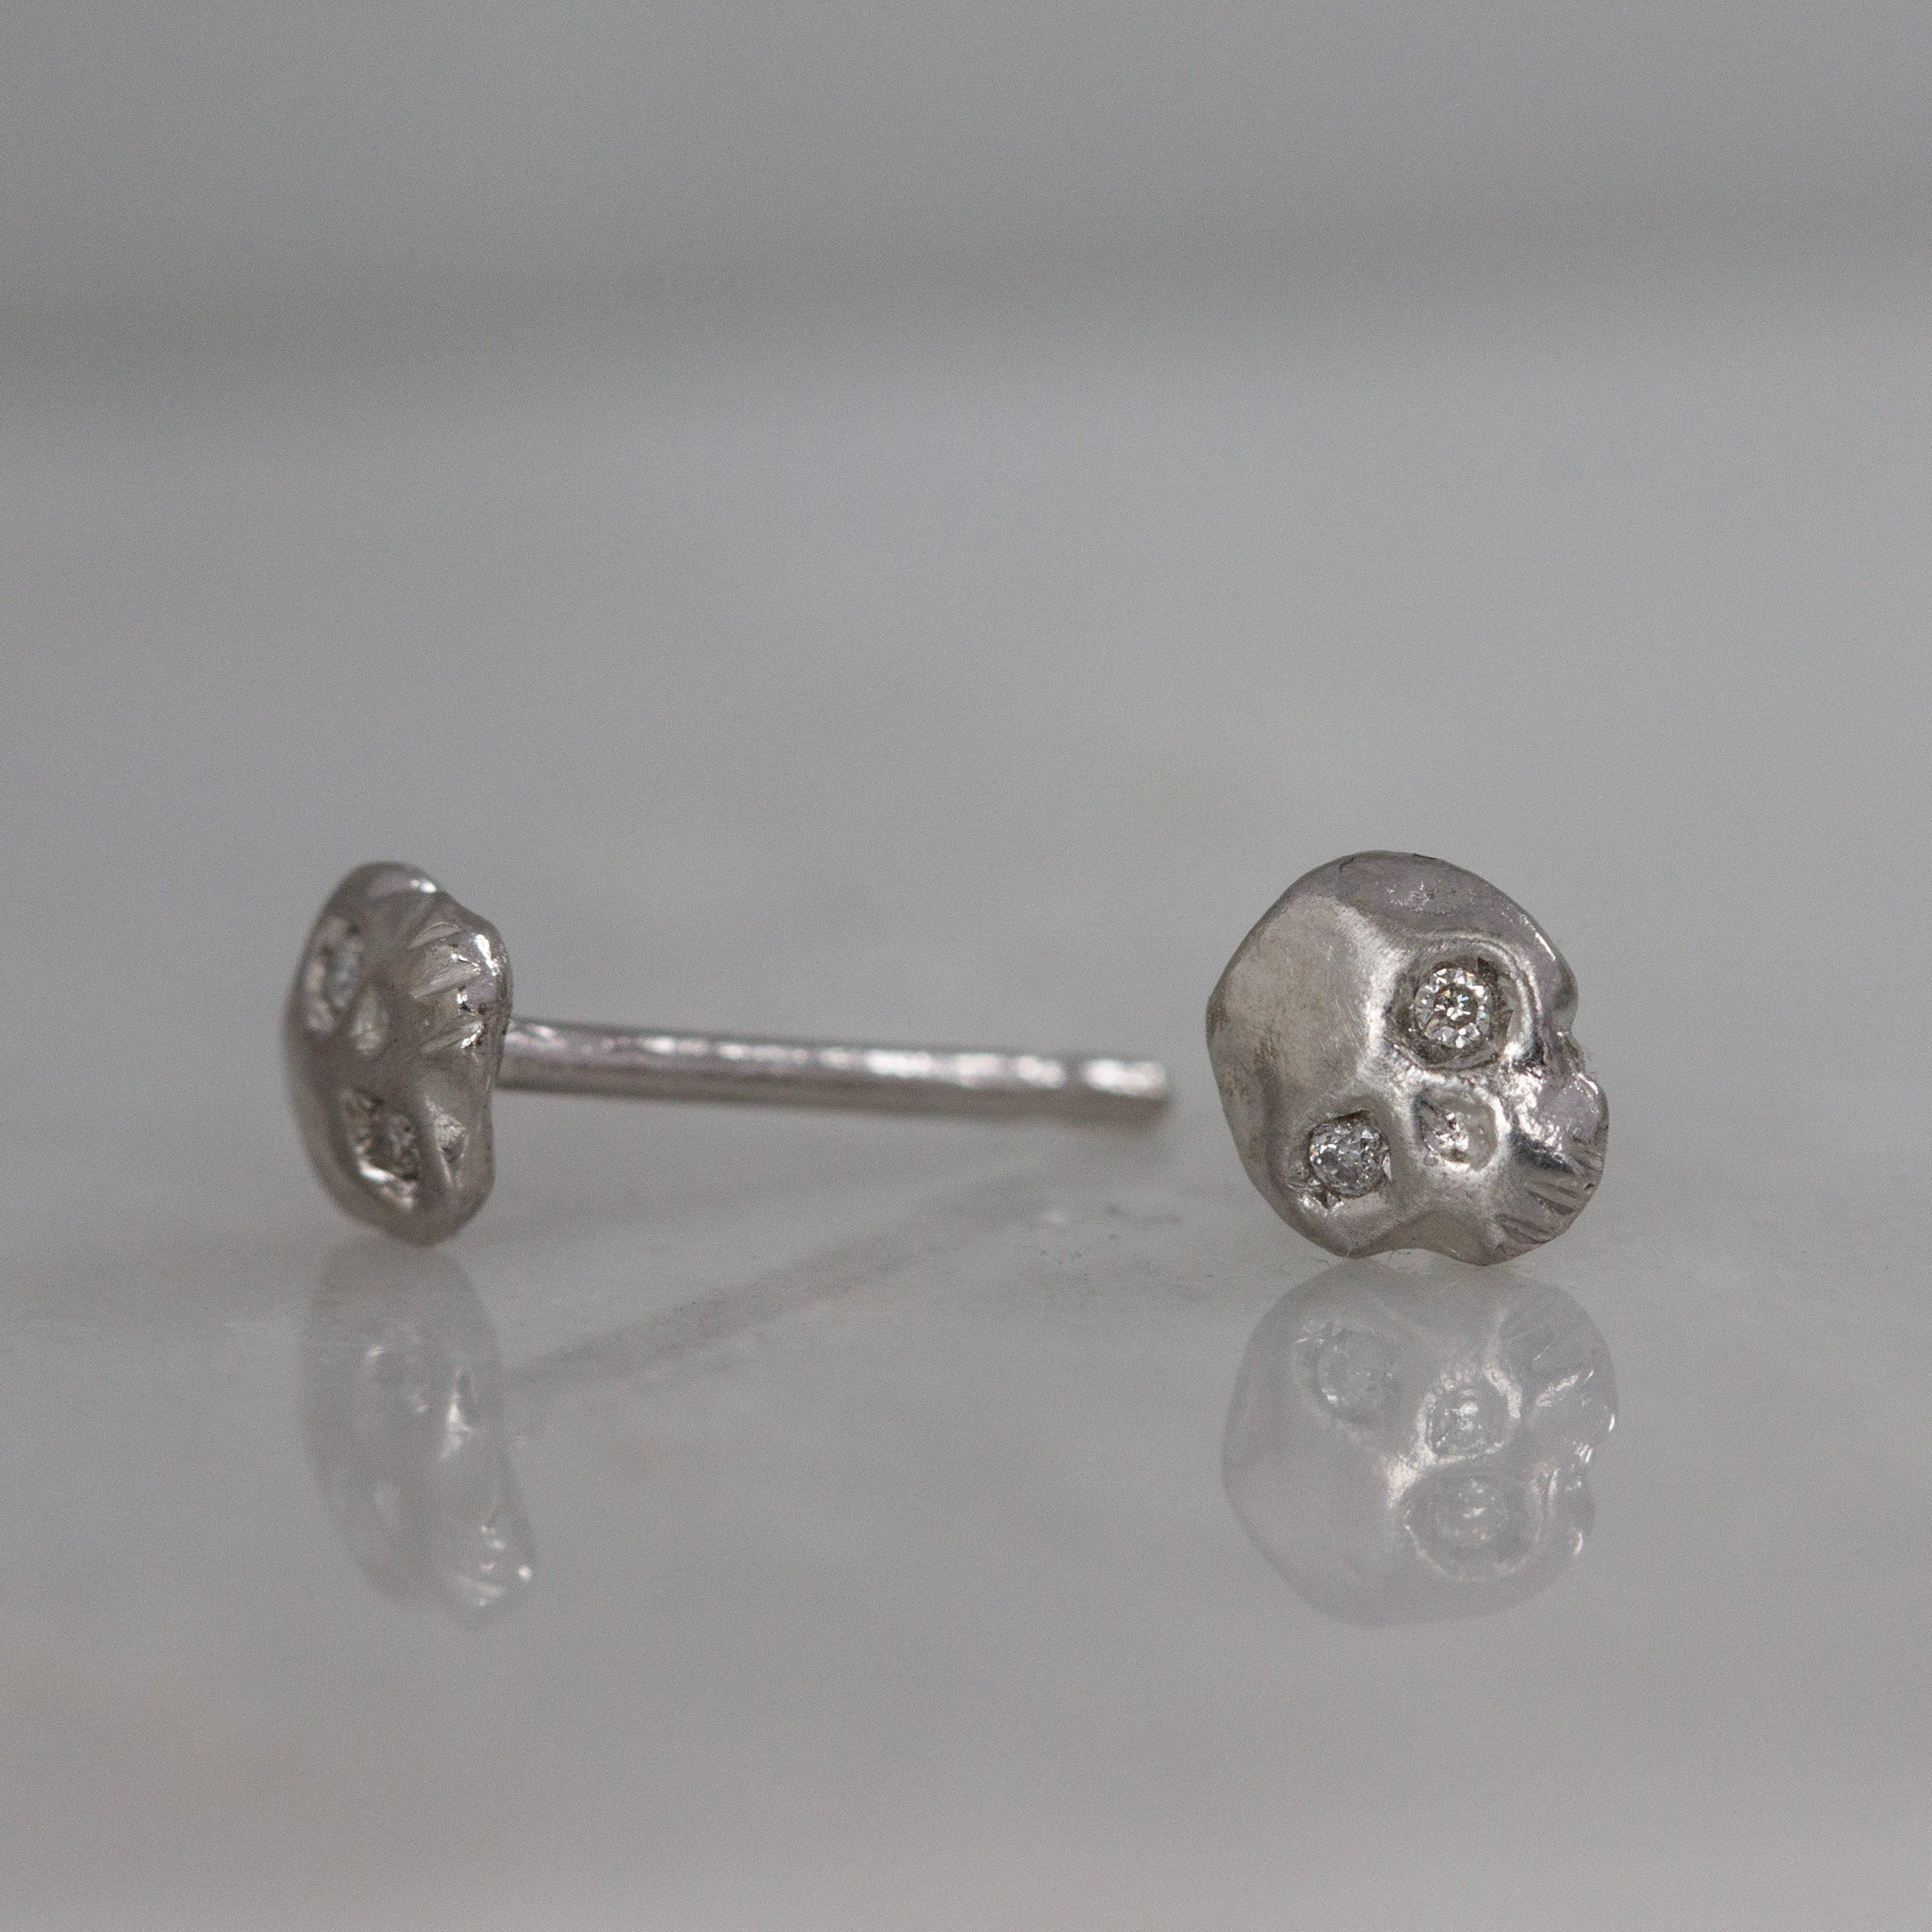 kelly star lannen, 12th house jewelry, ceremonial and celestial jewelry, sustainable jewelry, jewelry sculptor in NYC, handmade jewelry in NYC, Platinum Mignon skull studs with white diamond eyes, Celestial Jewelry, Anniversary jewelry, platinum earrings, boho bride